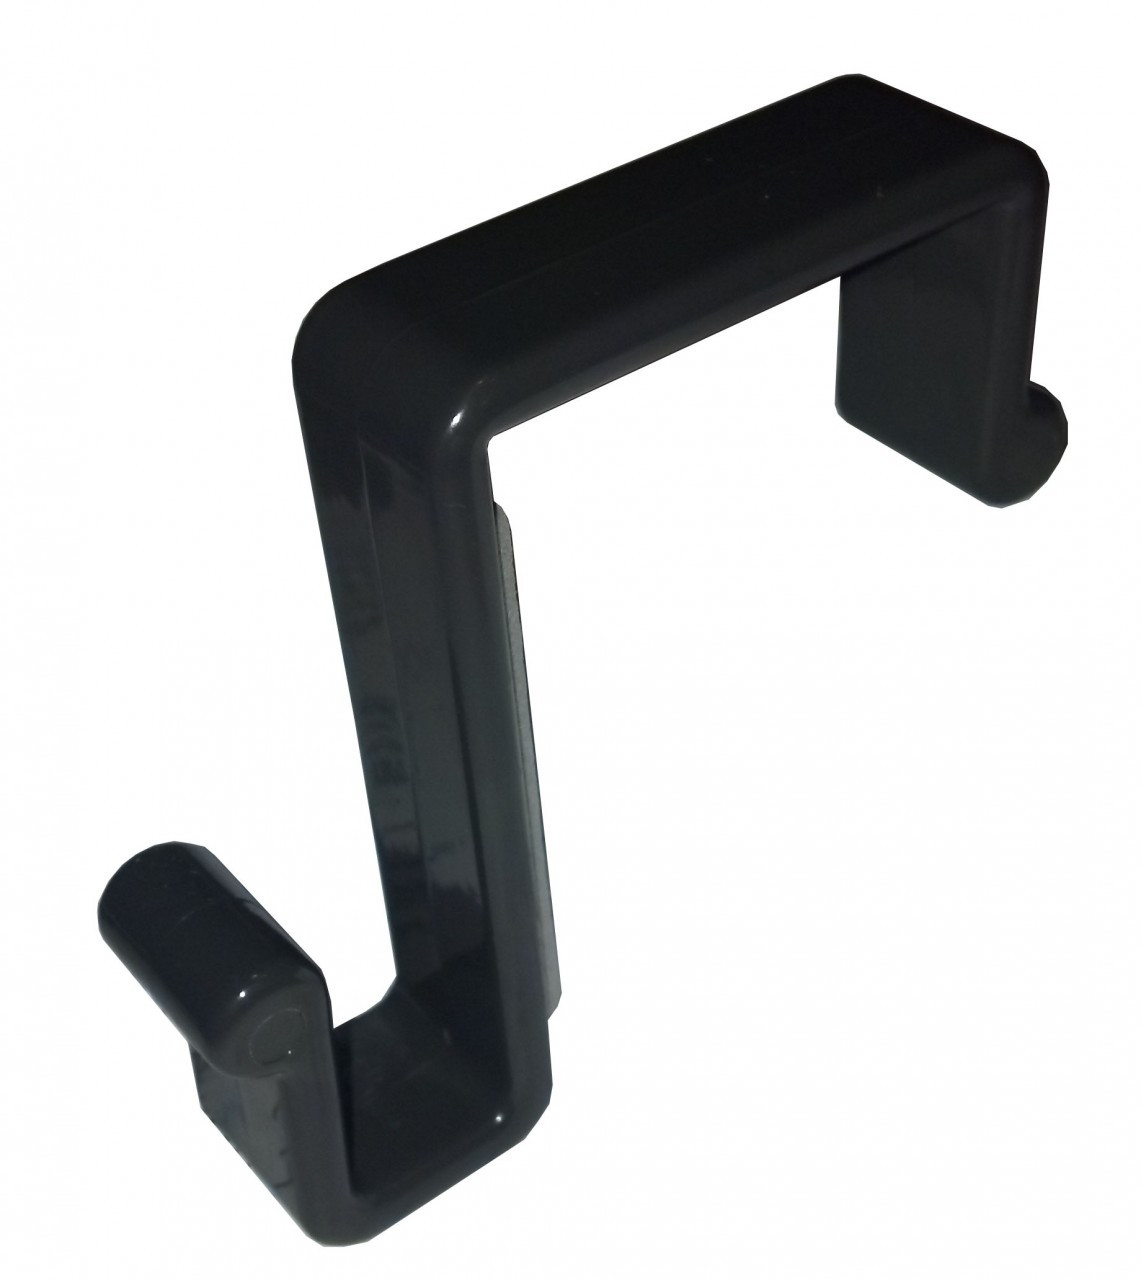 Adjustable Comes In 2 Pack 22009 Details about   Officemate Double Coat Hooks Cubicle Panels 